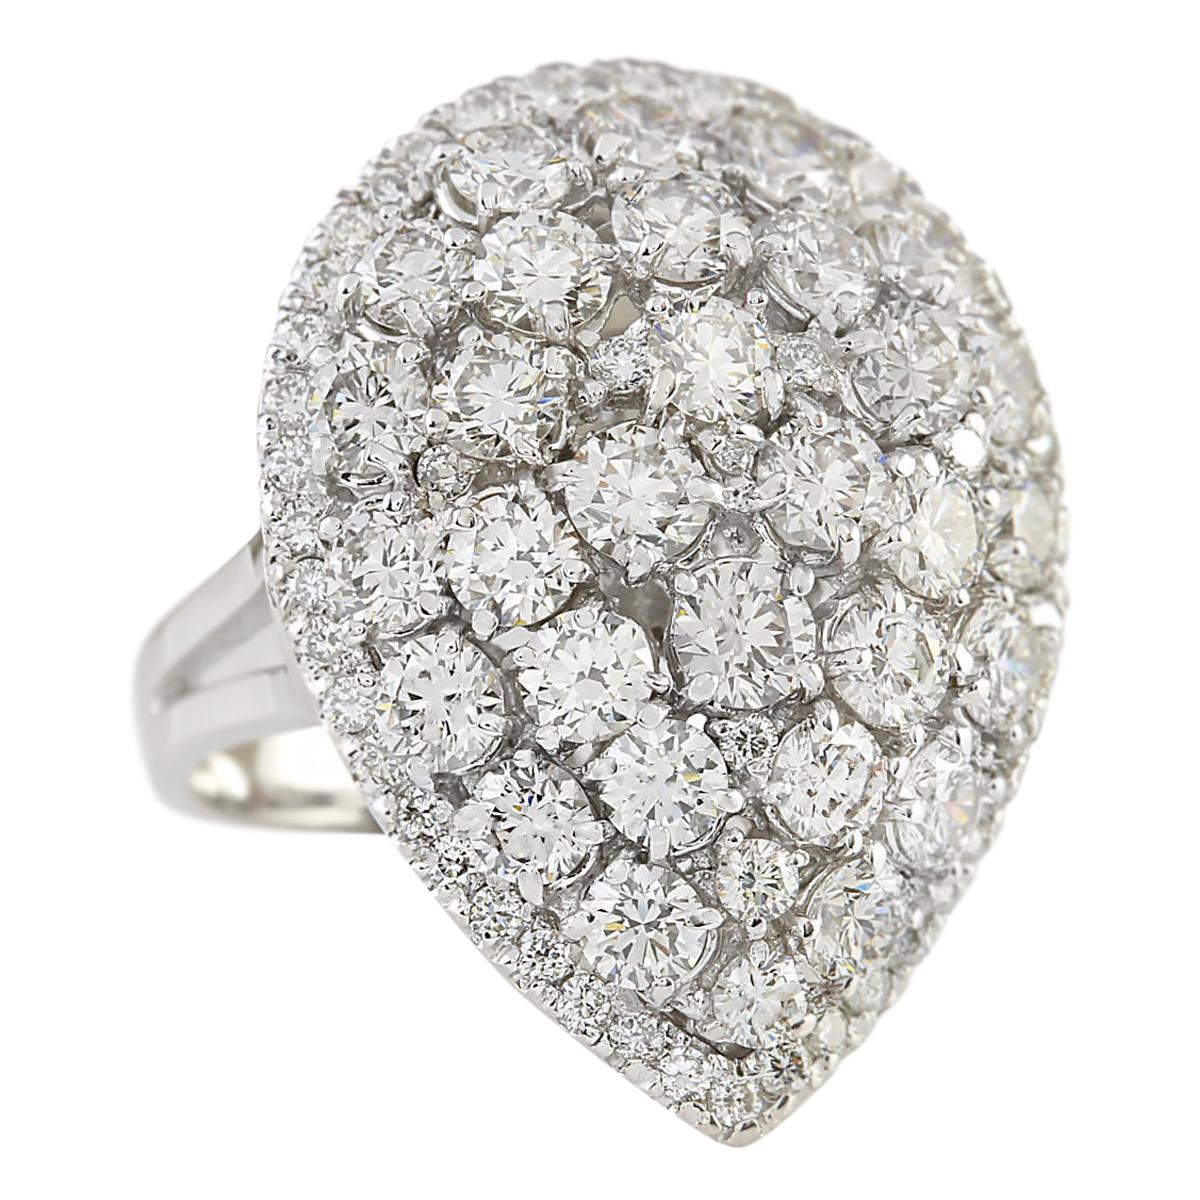 Stamped: 18K White Gold<br />Total Ring Weight: 10.0 Grams<br />Ring Length: N/A<br />Ring Width: N/A<br />Diamond Weight: Total  Diamond Weight is 4.50 Carat<br />Color: F-G, Clarity: VS2-SI1<br />Face Measures: 27.17x20.30 mm<br />Sku: [703370W]
